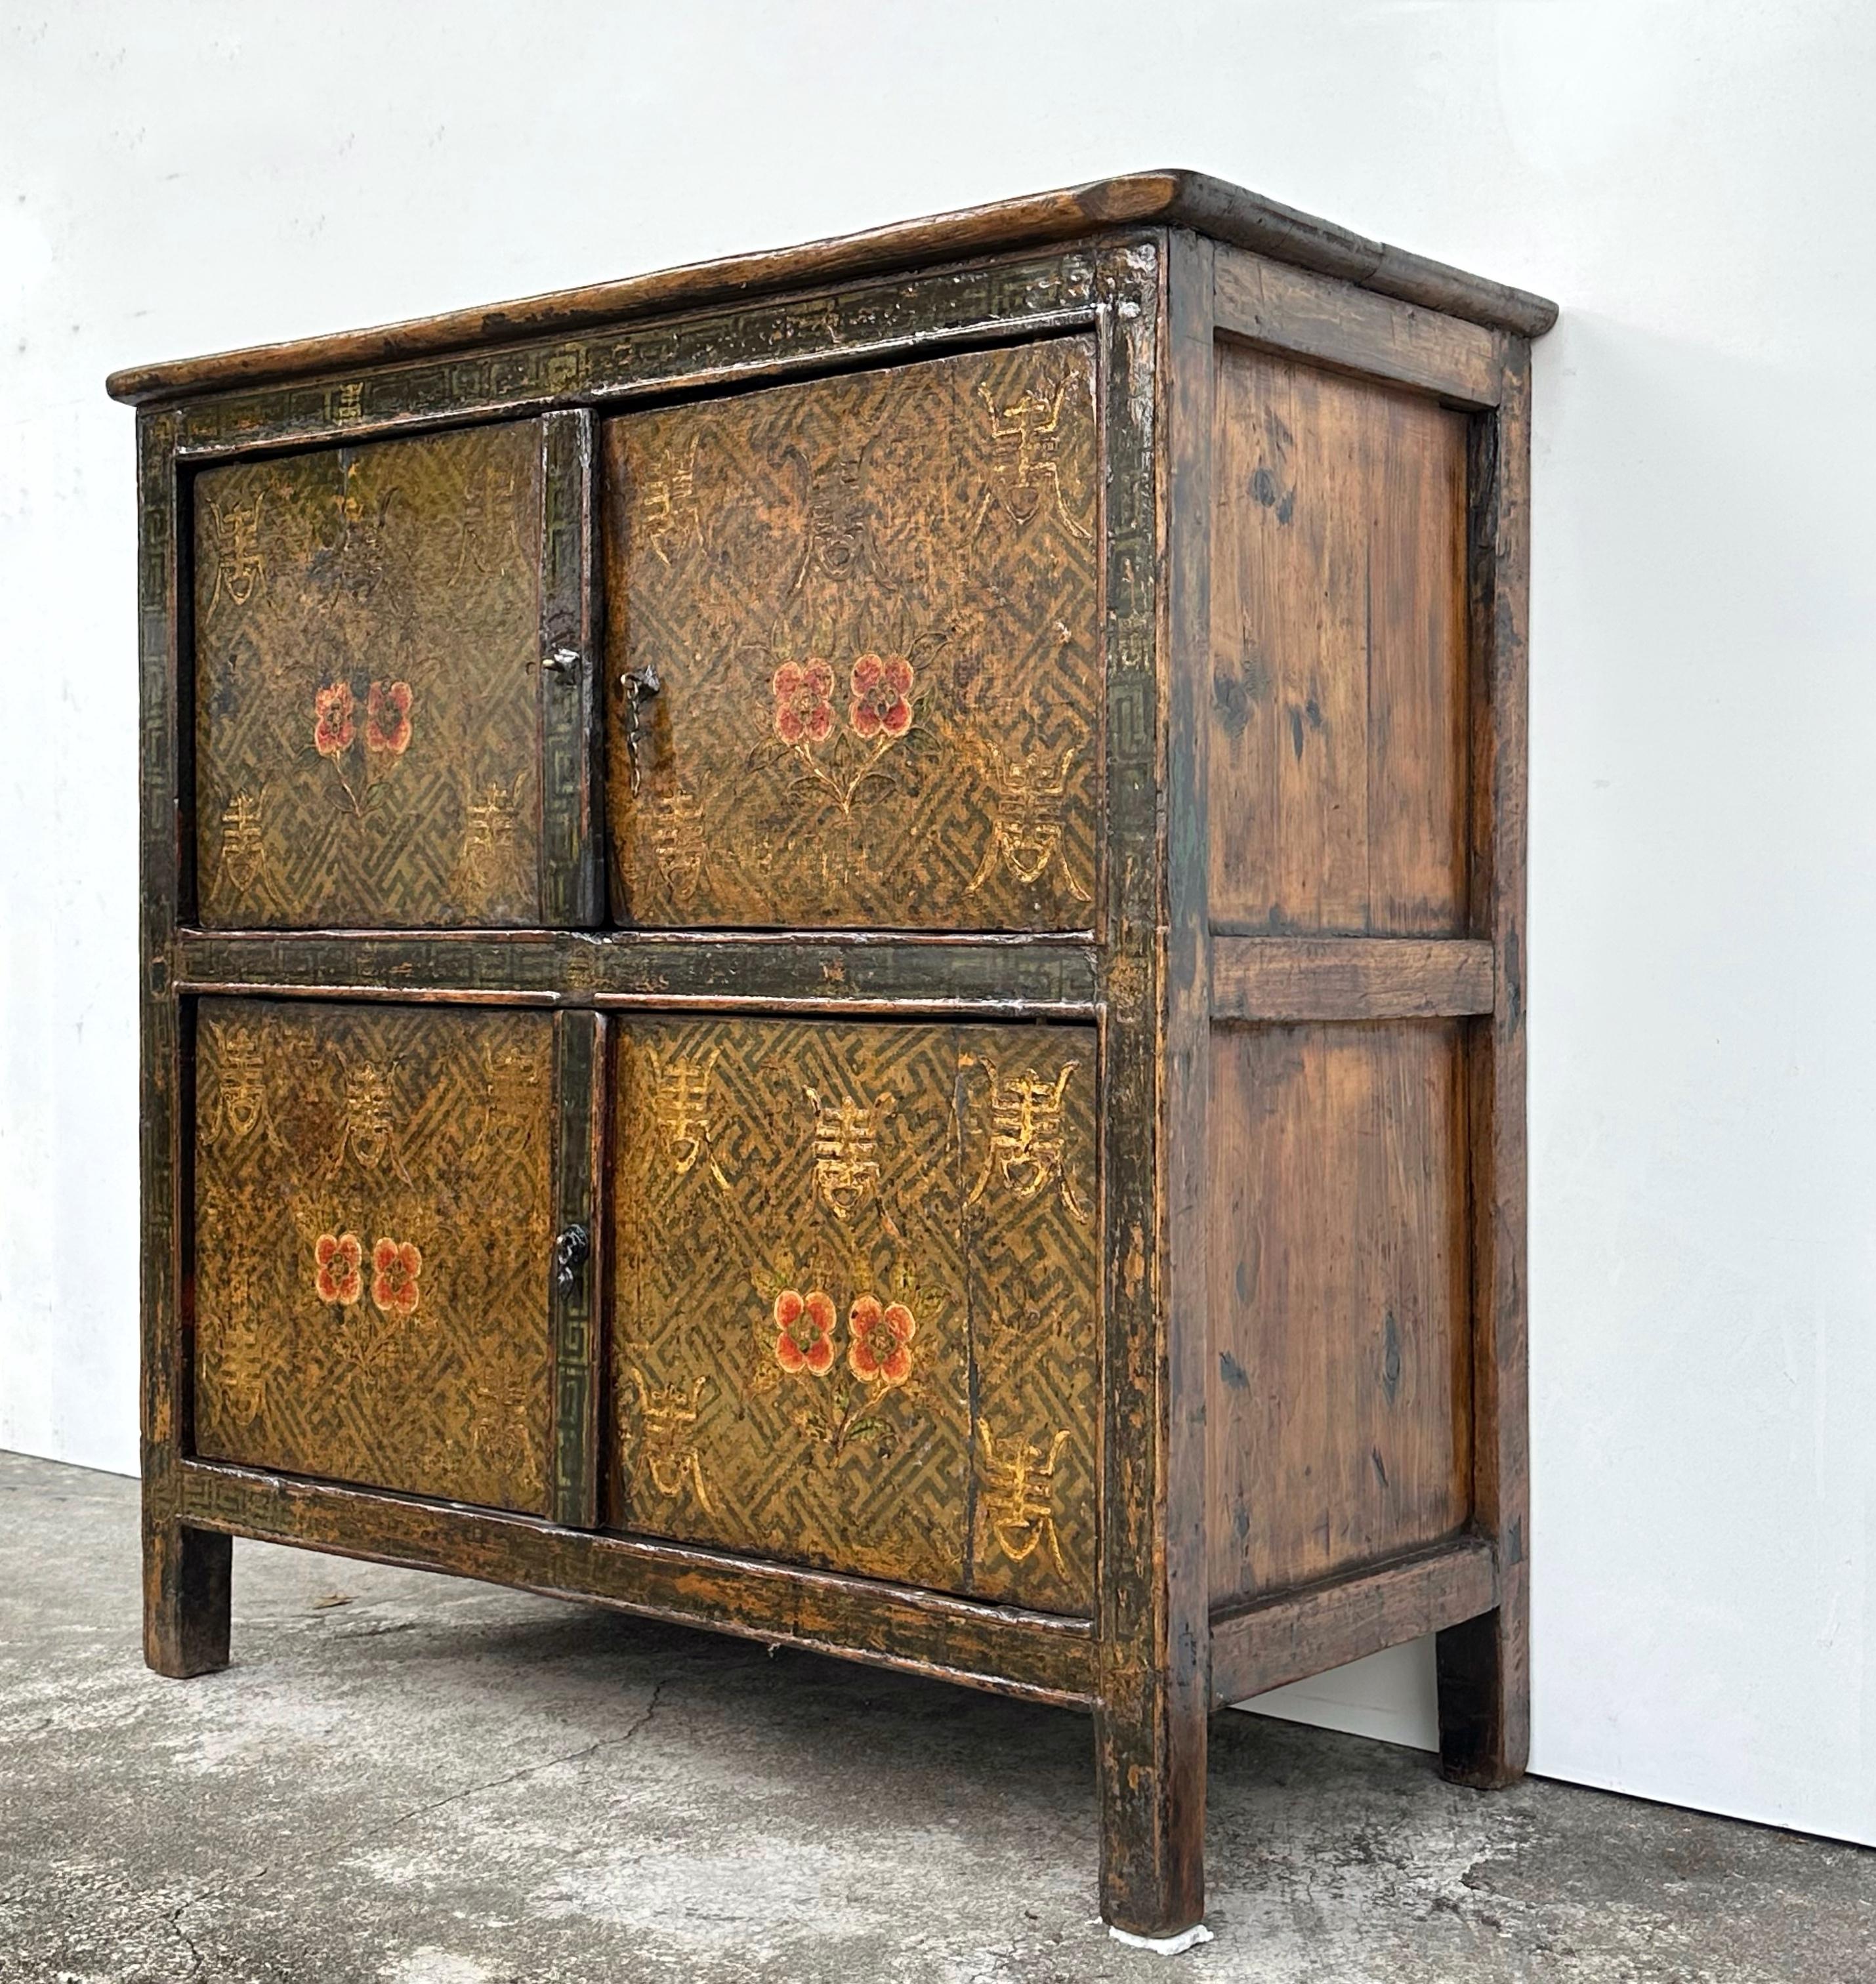 A beautiful Tibetan cabinet with subtle hand-painted designs, there is a pair of small red flowers on each door, and each pair of flowers is accompanied by five longevity symbols (painted in white). These designs are painted over a Buddhist swastika